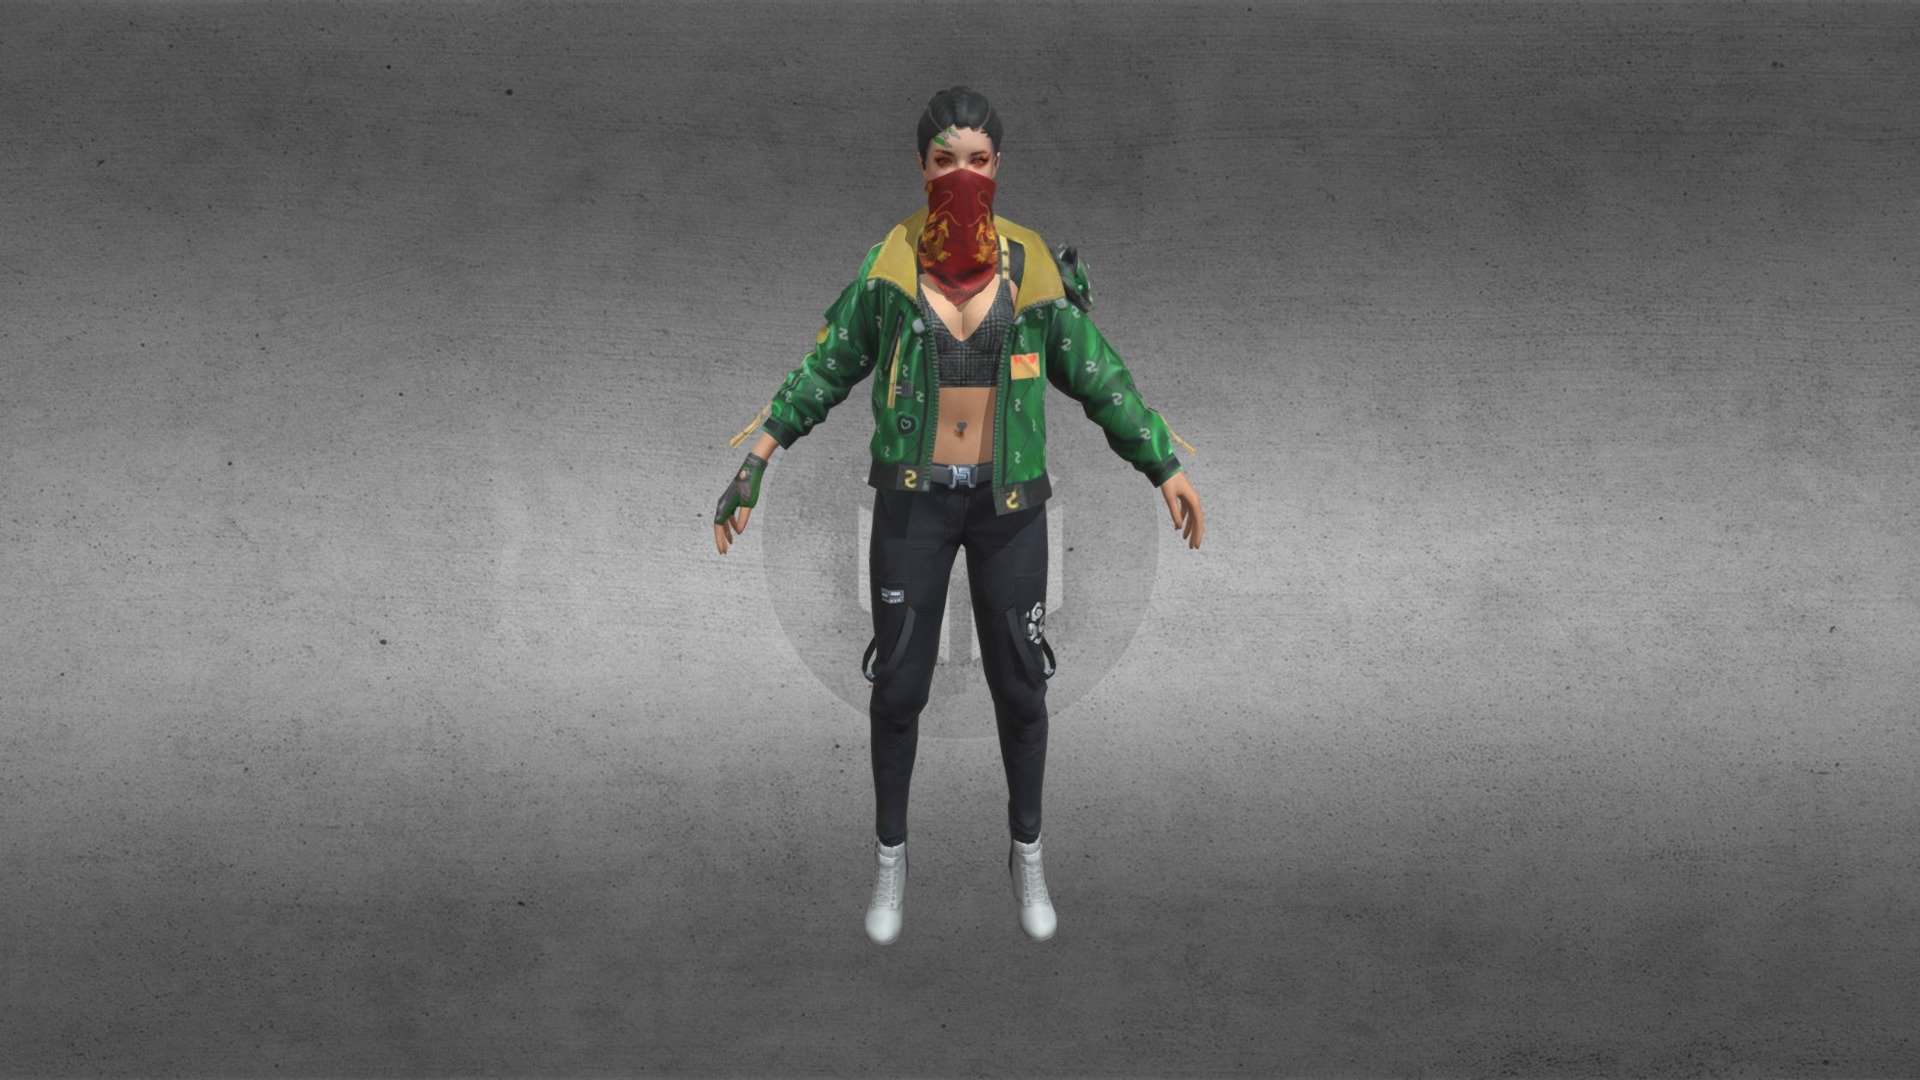 FOLLOW FOR MORE MODELS 
SUBSCRIBE - PACE GAMING 
GIVE CREDIT IF YOU ARE USING THIS MODEL - freefire new  female 3d model by pace gaming - Download Free 3D model by PACE GAMING FF (@MDARBAZ_.OR___-PACEGAMINGFF) 3d model